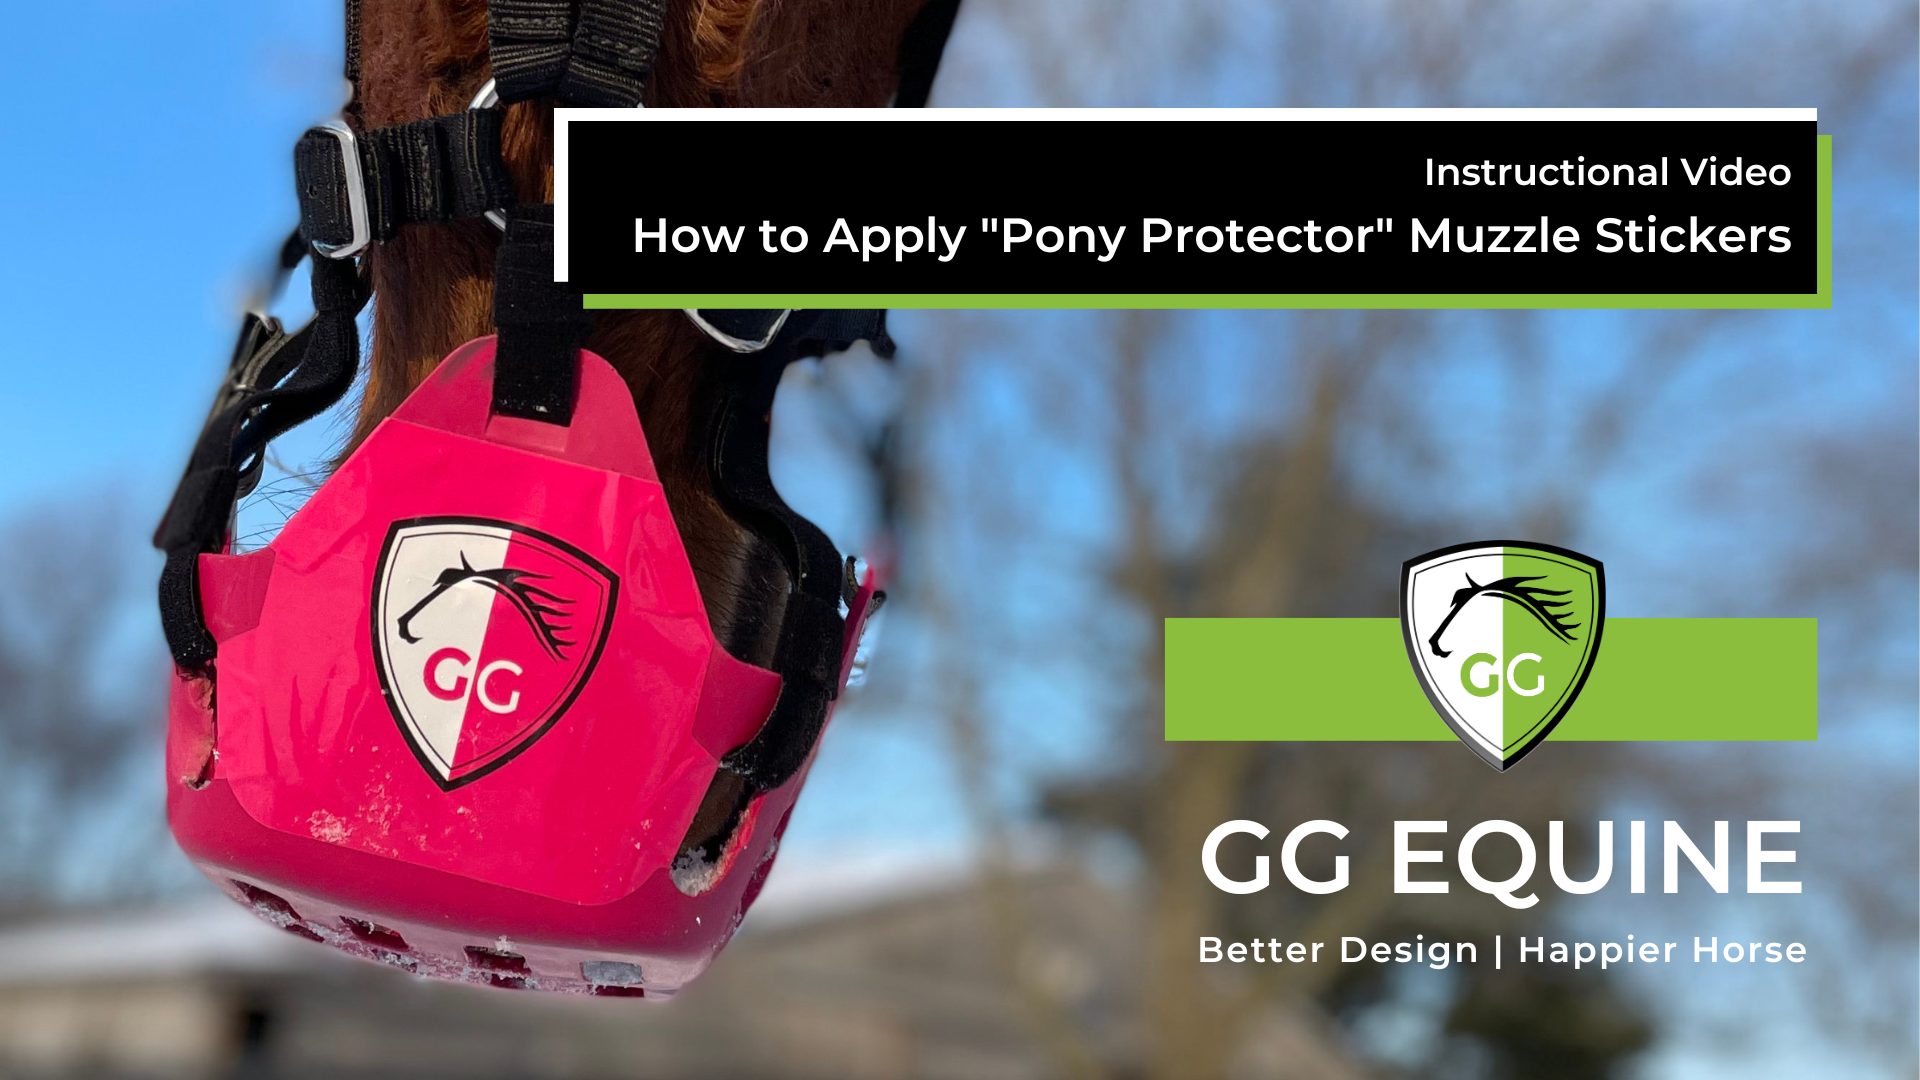 Cargar vídeo: Full tutorial and instruction video for the GG Pony Protector Muzzle Stickers